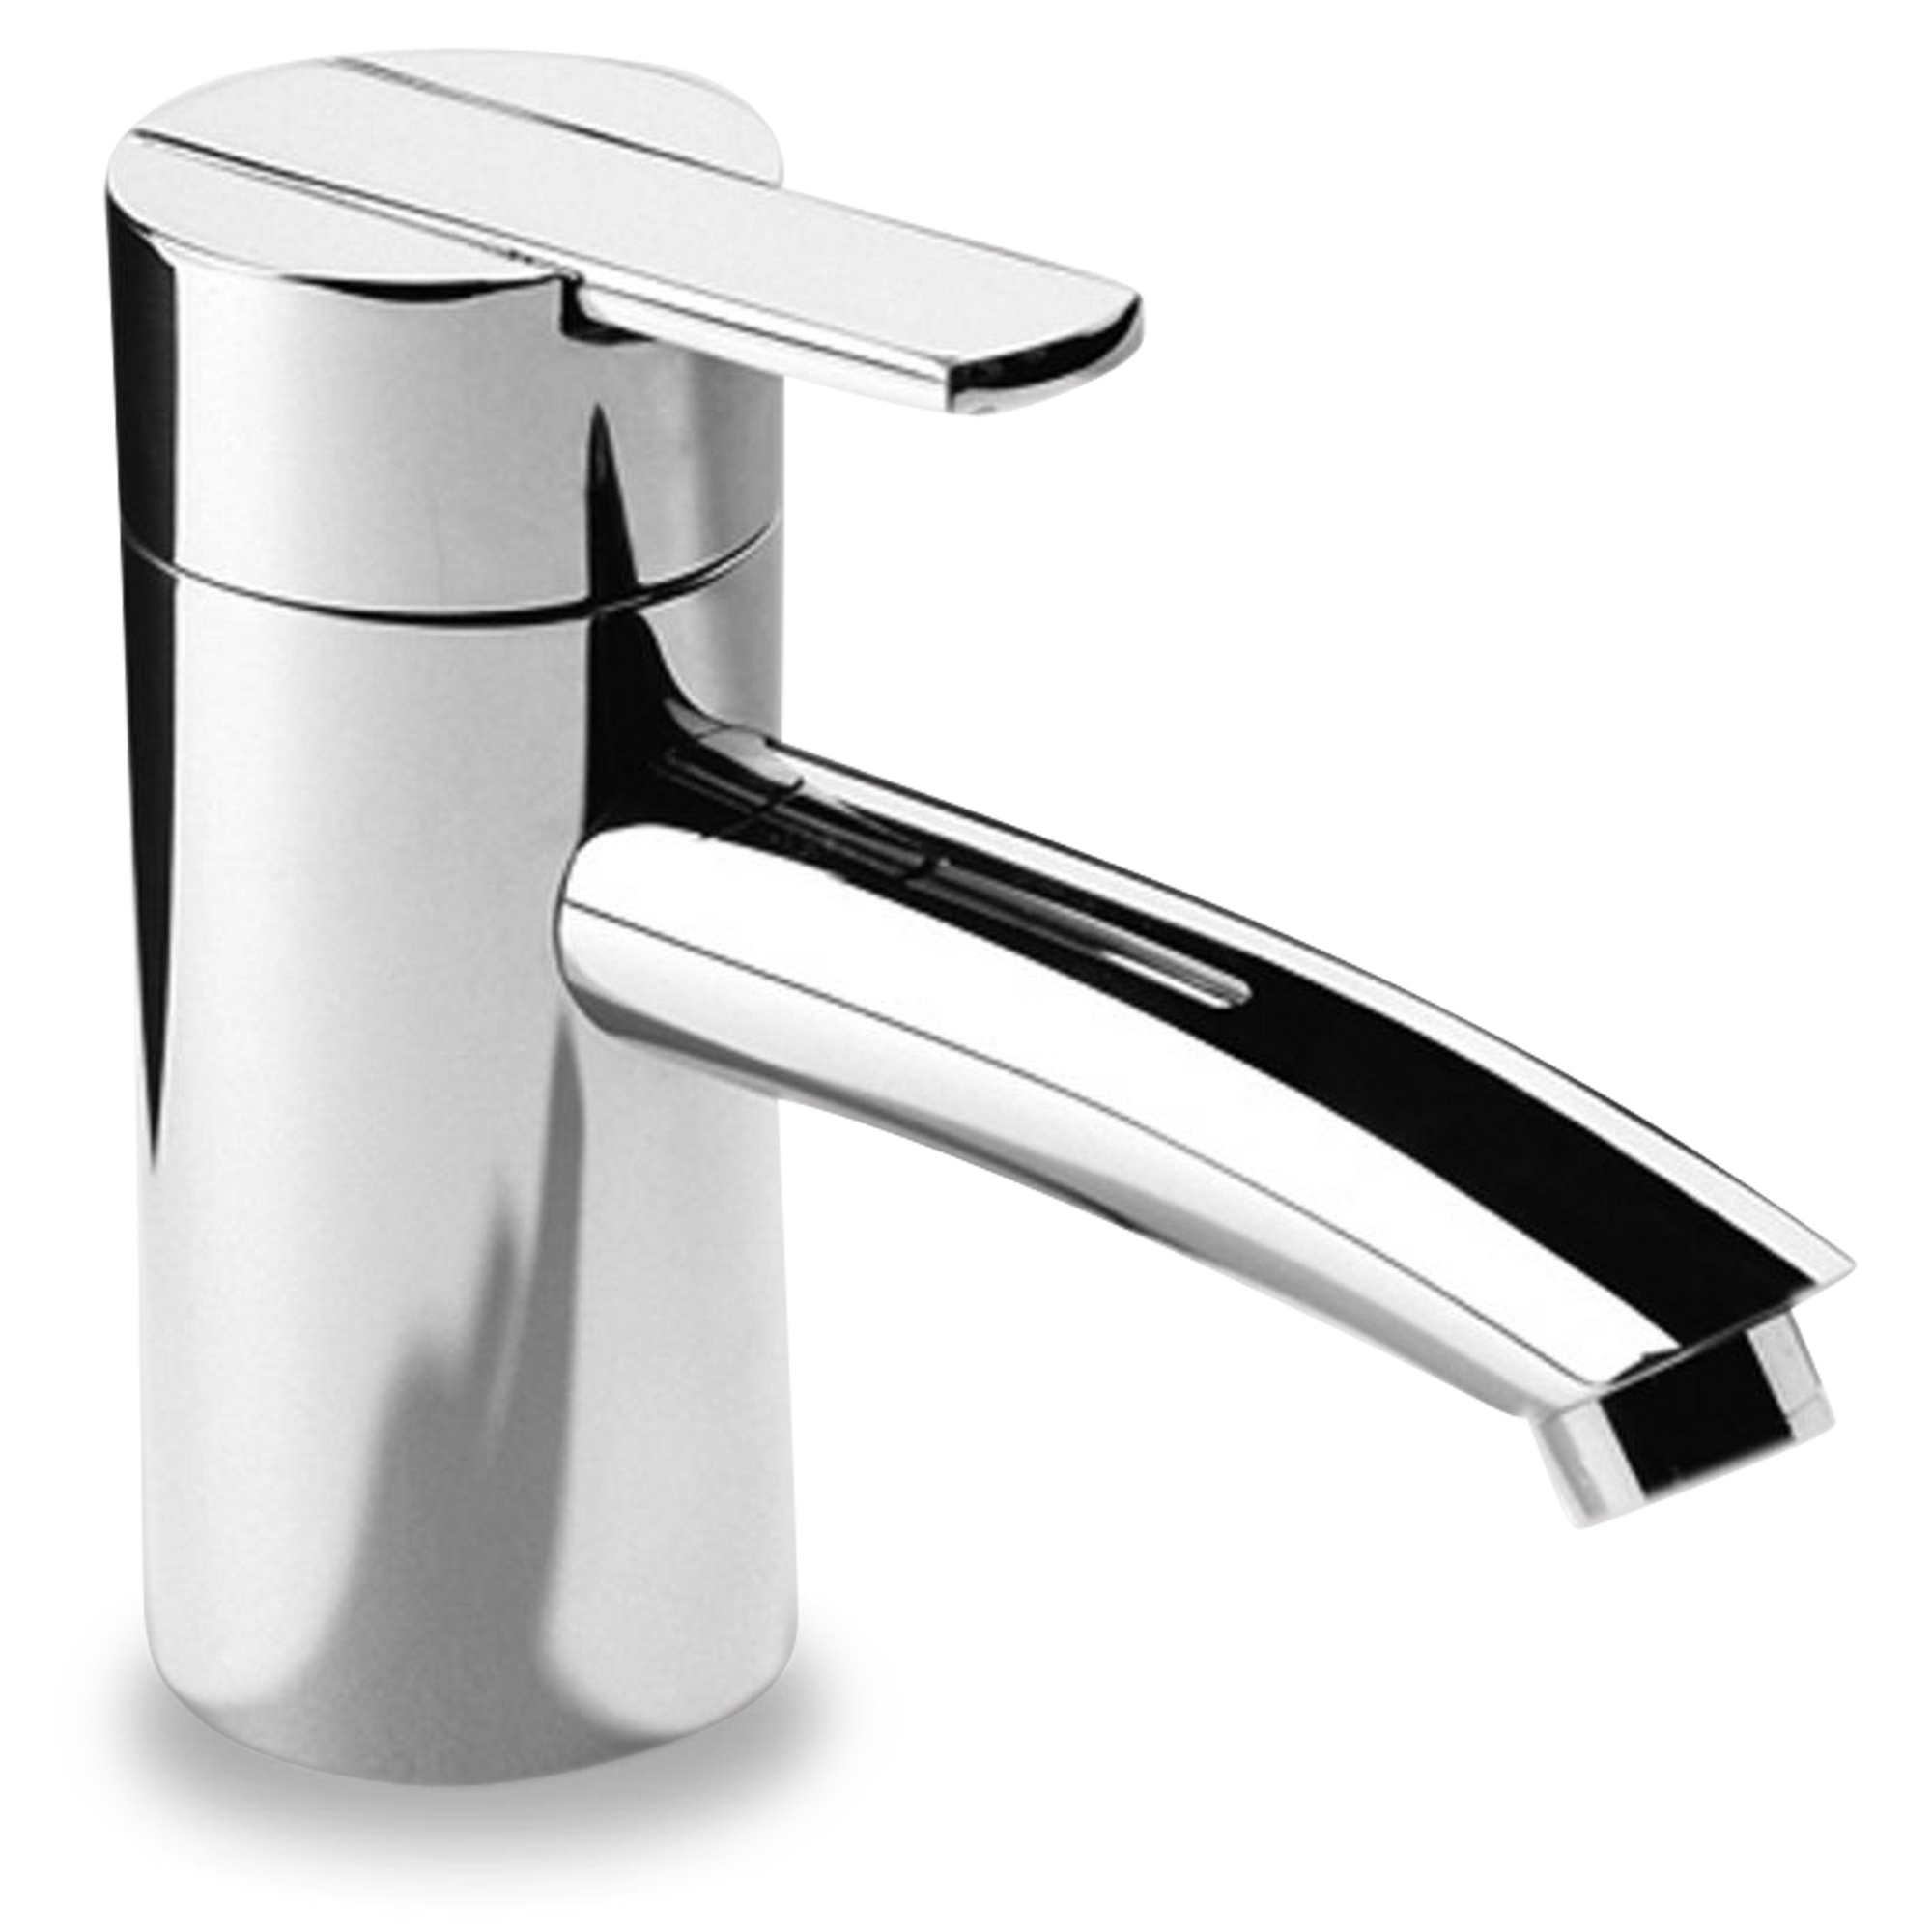 A single-hole faucet with one gently curved lever handle.